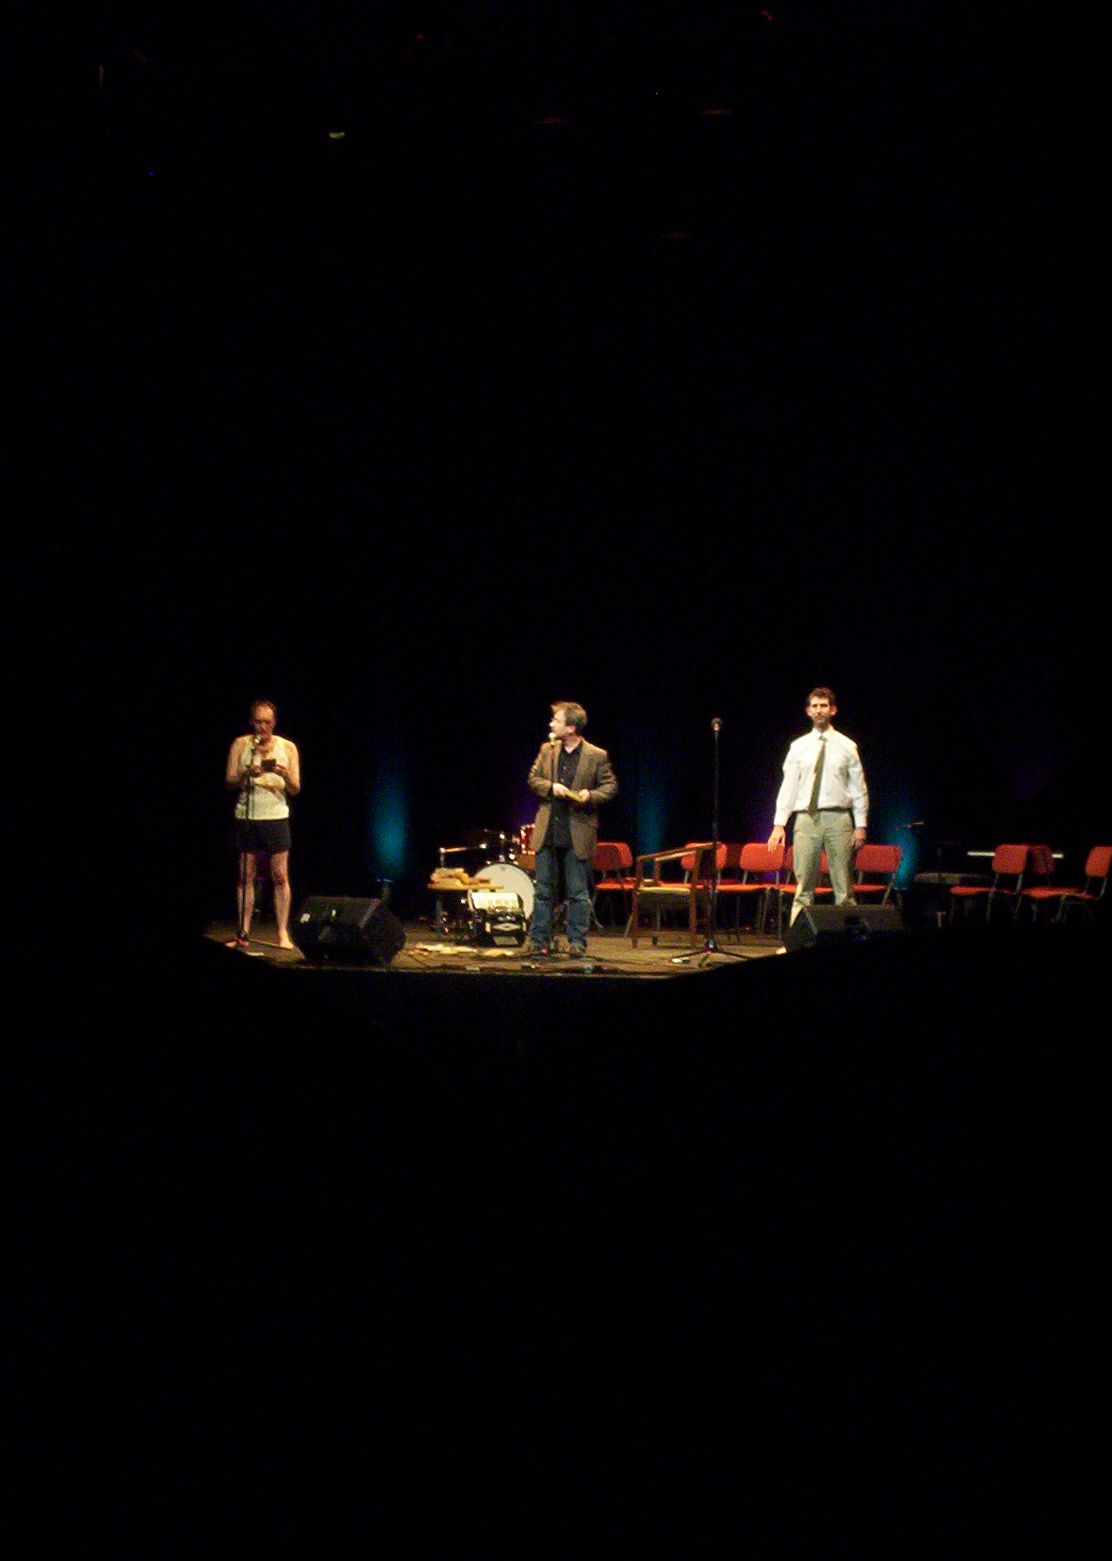 three men stand in front of a group of empty chairs on a stage